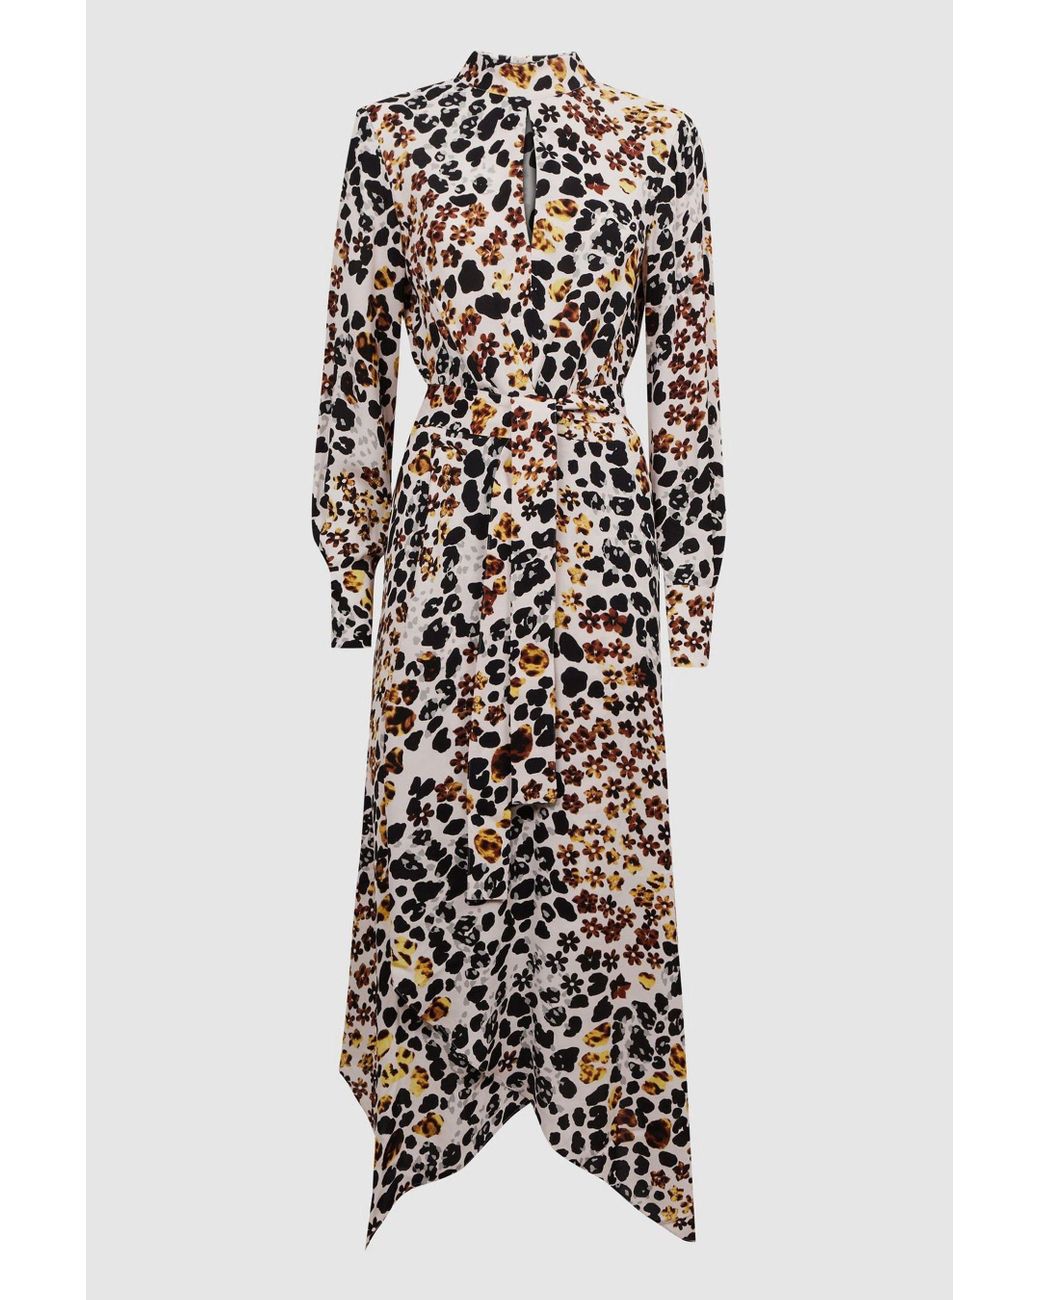 WHISTLE ANIMAL PRINT ESME DRESS SIZE 10 | www.theconservative.online